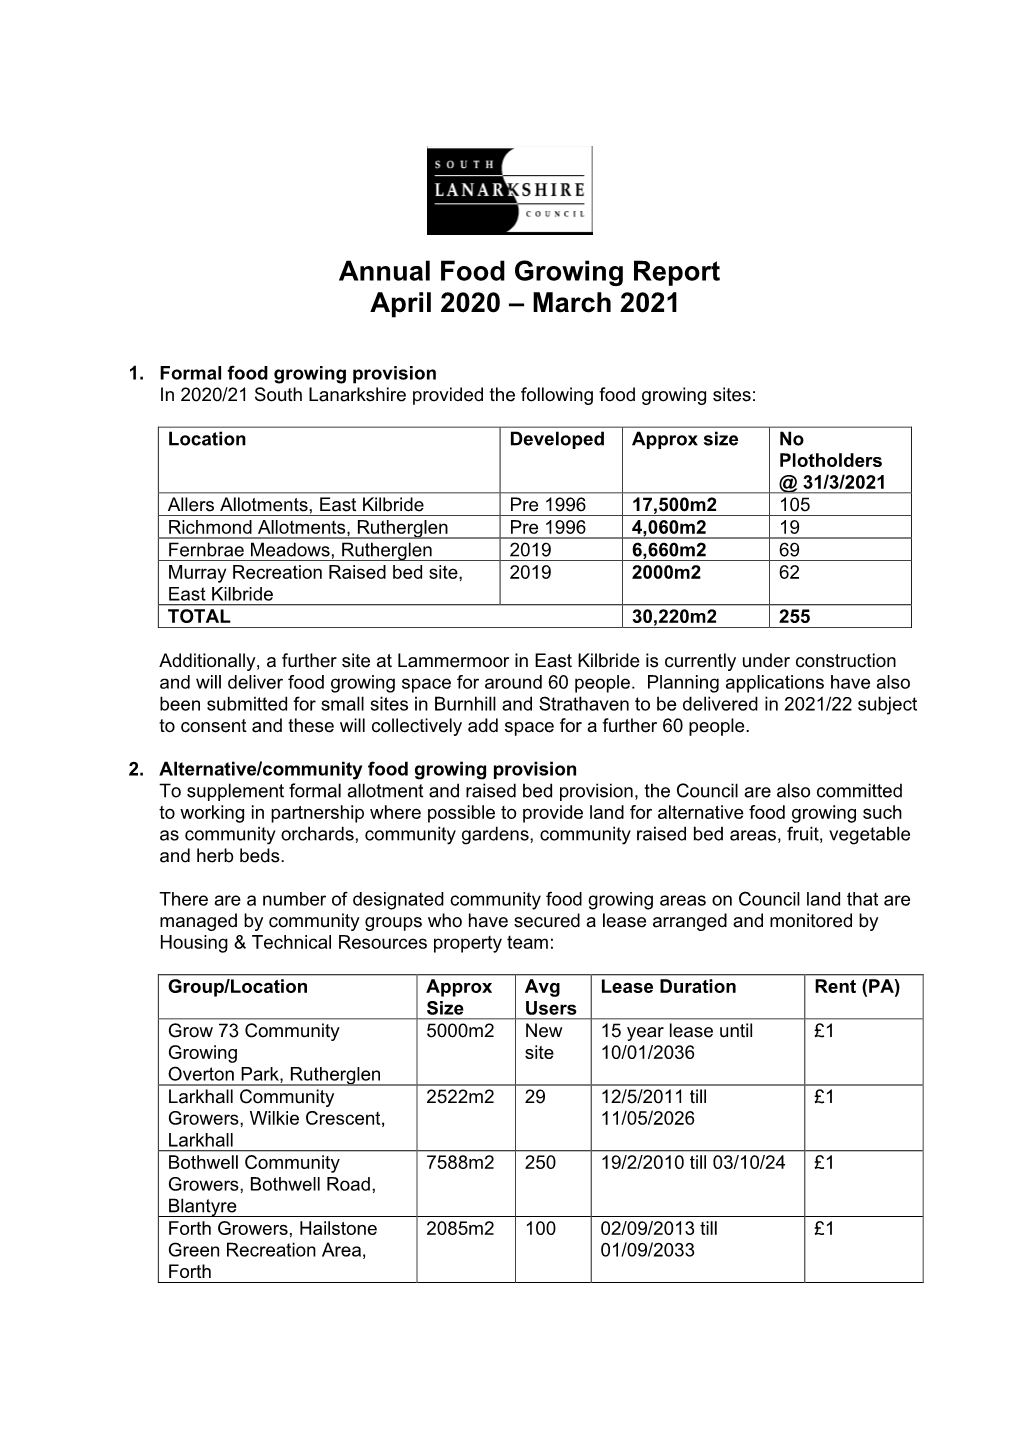 Annual Food Growing Report April 2020 – March 2021